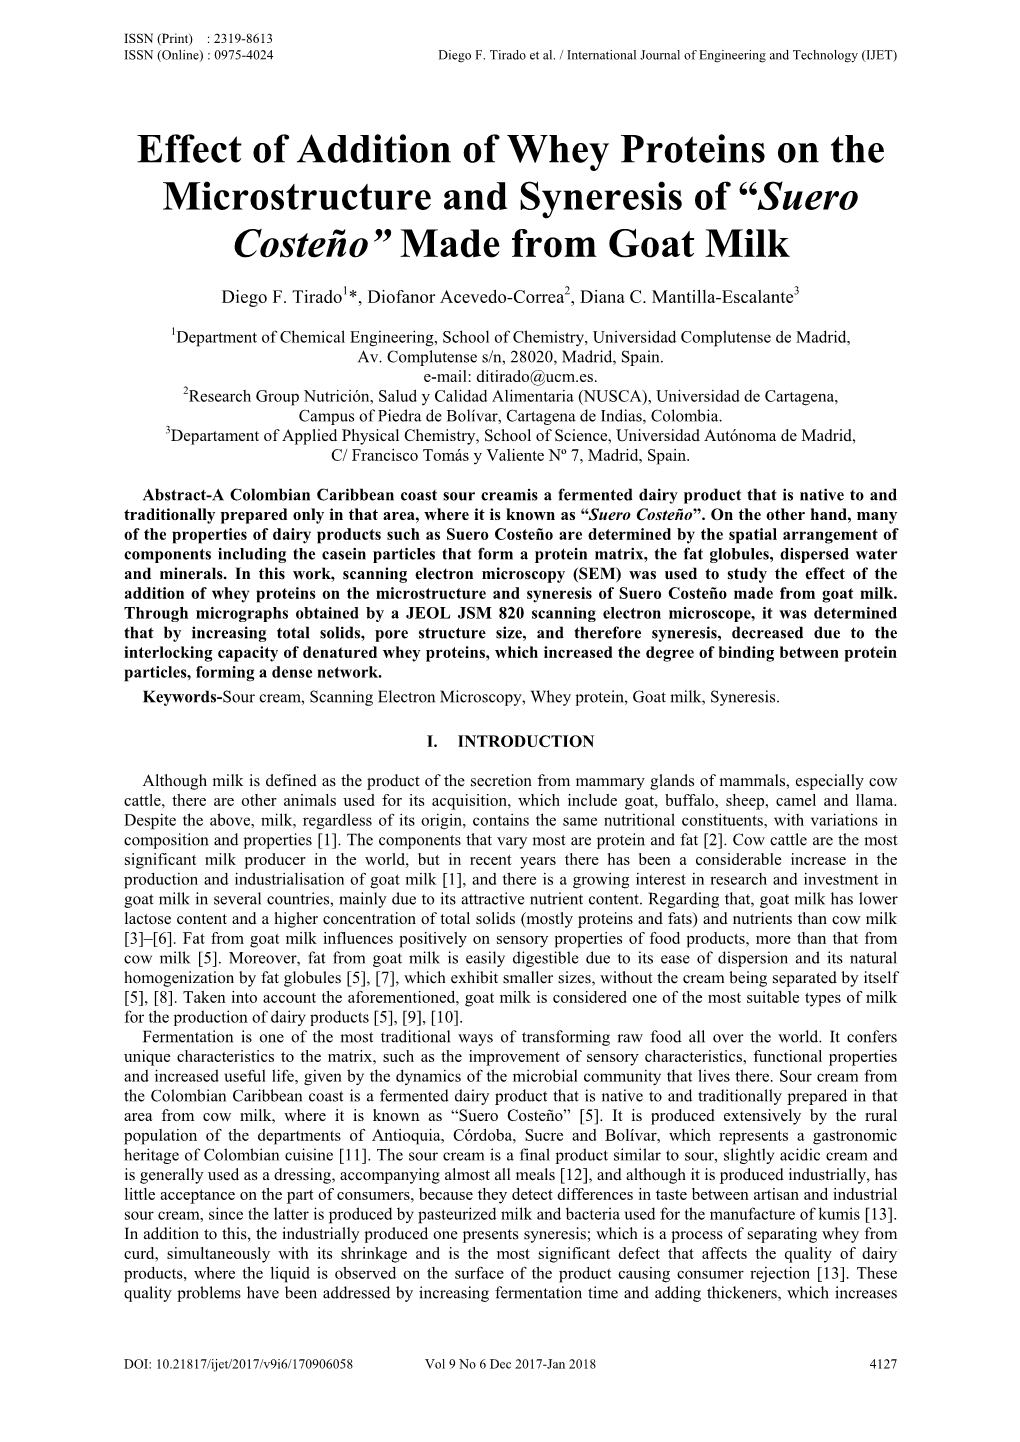 Effect of Addition of Whey Proteins on the Microstructure and Syneresis of “Suero Costeño” Made from Goat Milk